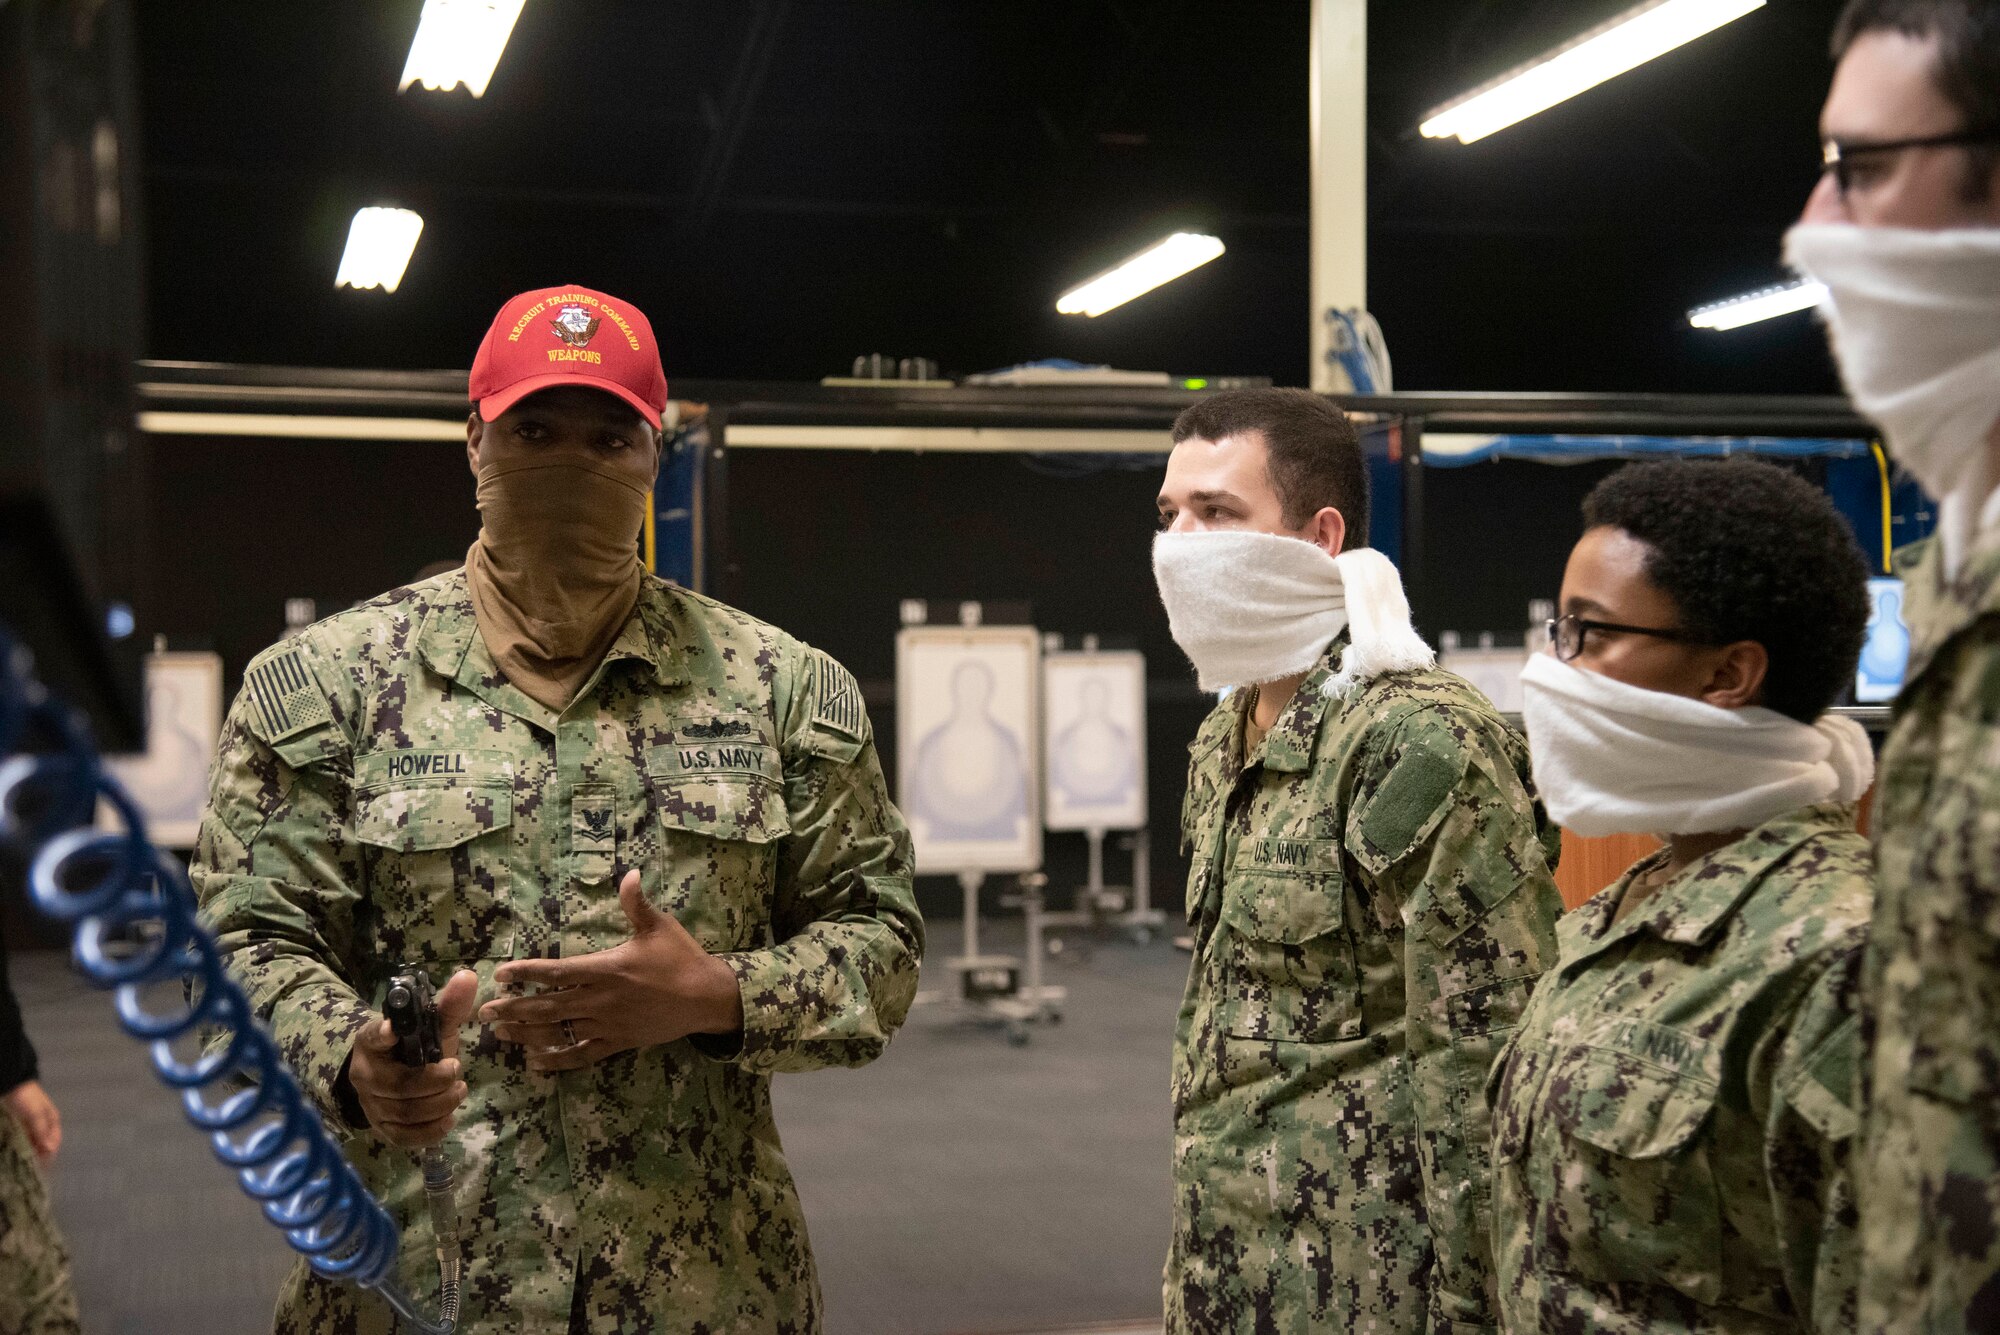 Recruits receive instruction in the USS Missouri Small Arms Marksmanship Trainer April 23. More than 35,000 recruits train annually at the Navy's only boot camp.